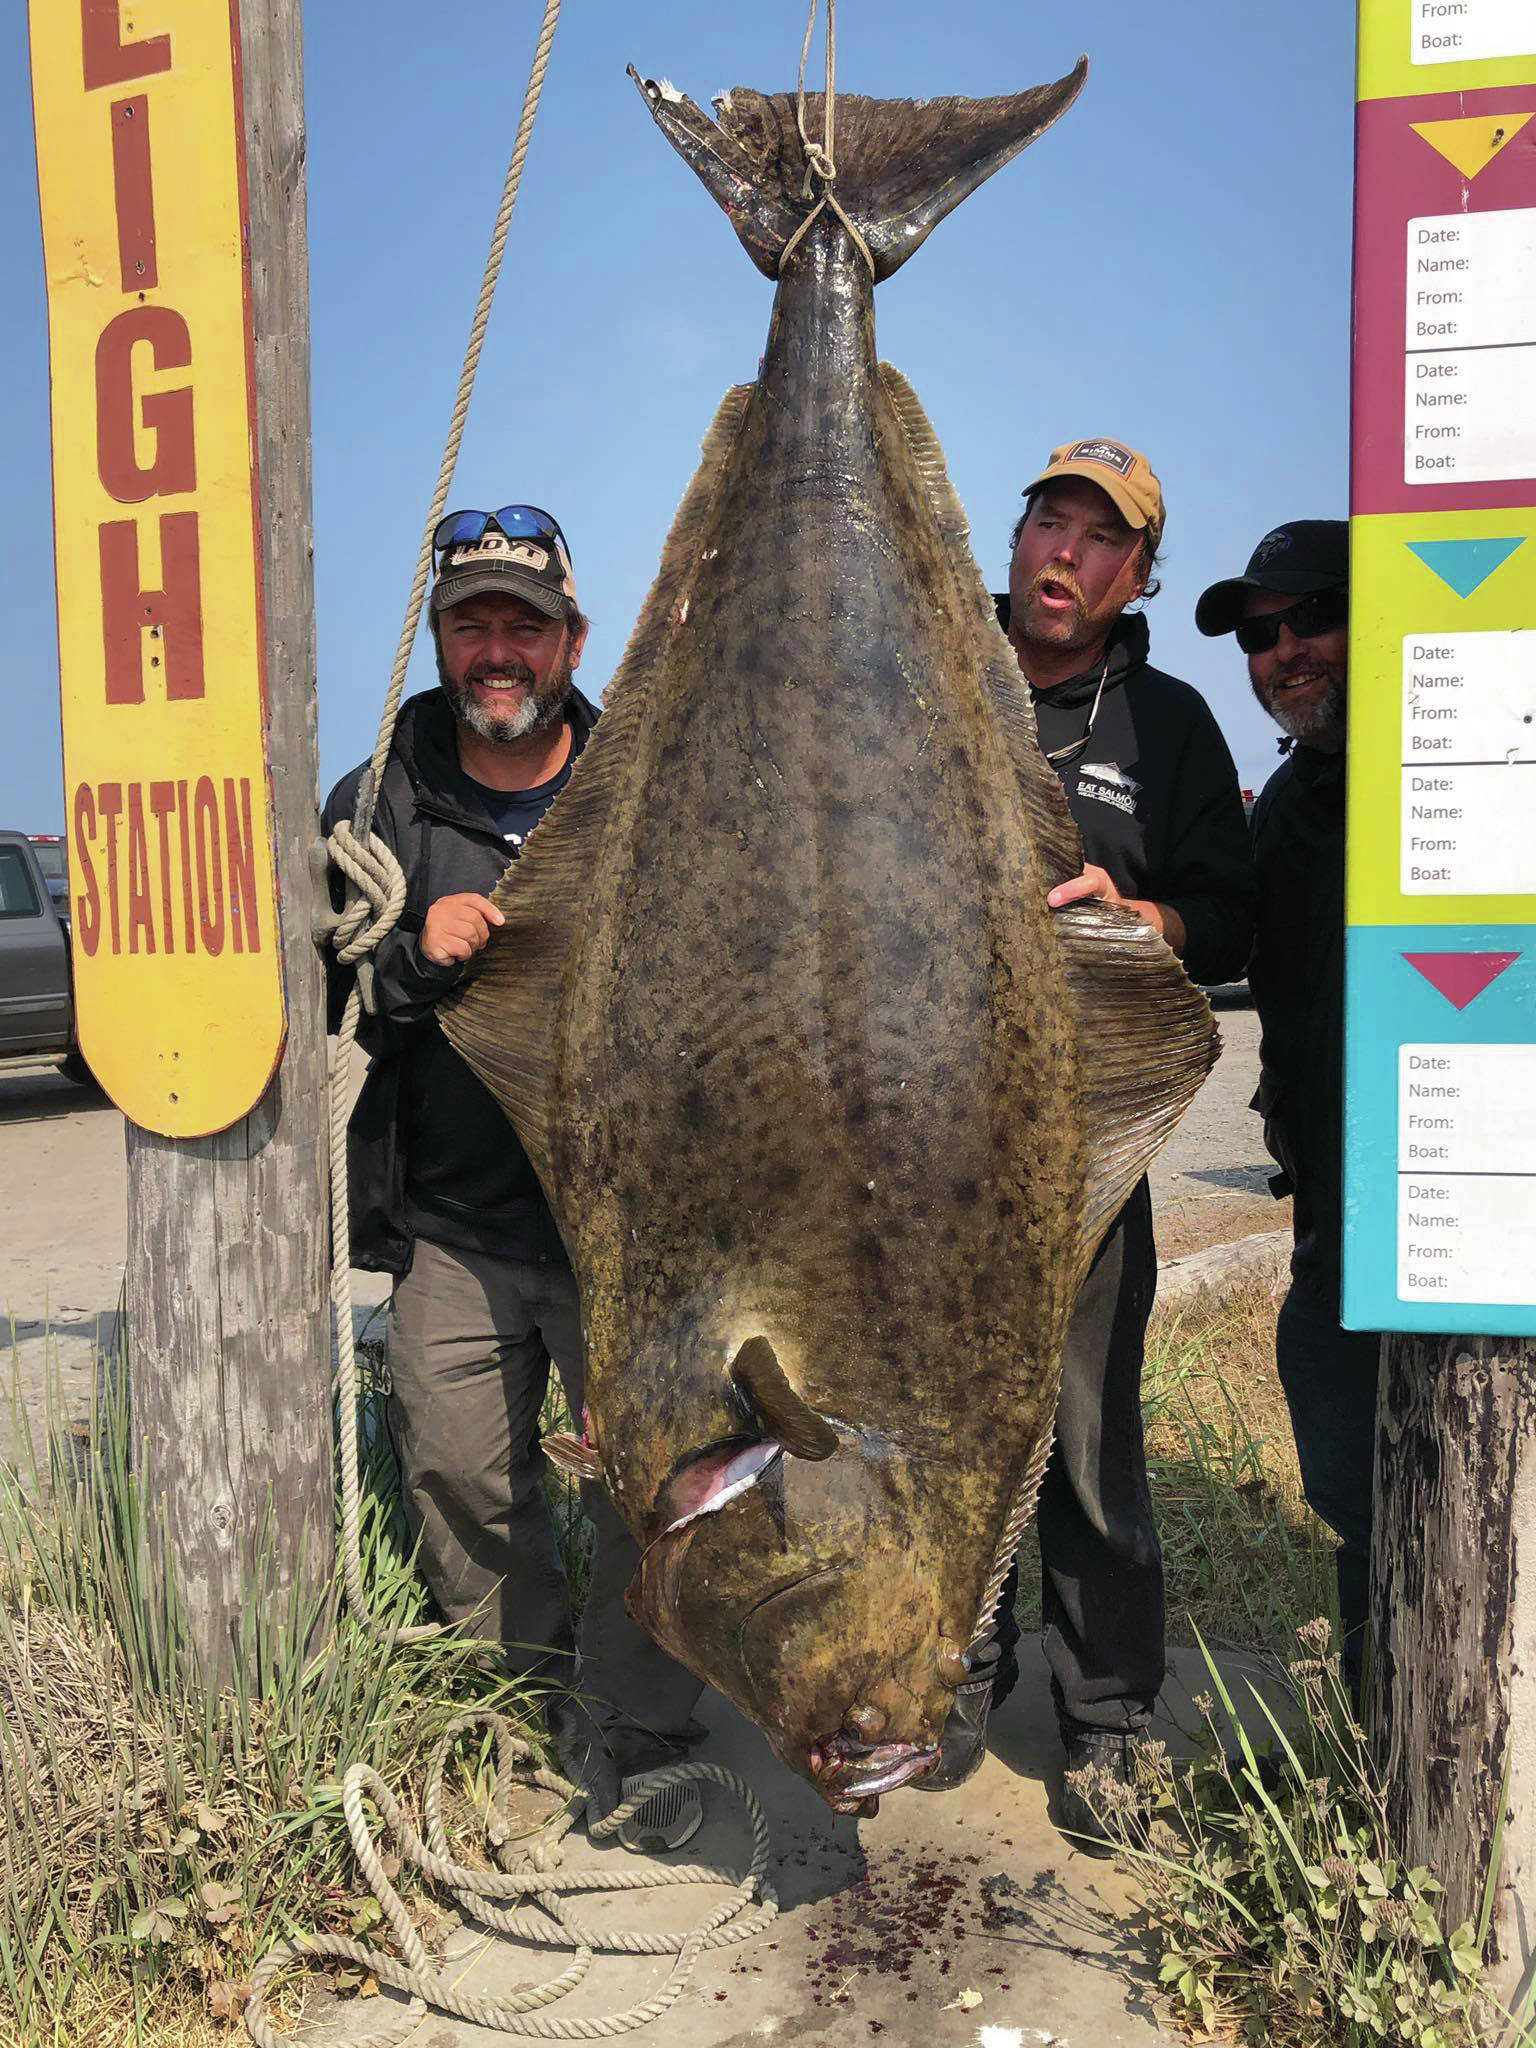 Homer Jackpot Halibut Derby winner Jason Schuler, left, of Wahpeton, North Dakota, poses with his 224.2-pound fish on July 12, 2019, in Homer, Alaska. To the right of the fish is Captain Daniel Donich of Daniel’s Personalized Guide Service. Schuler caught the fish on Donich’s boat, the Optimist. (Photo provided)